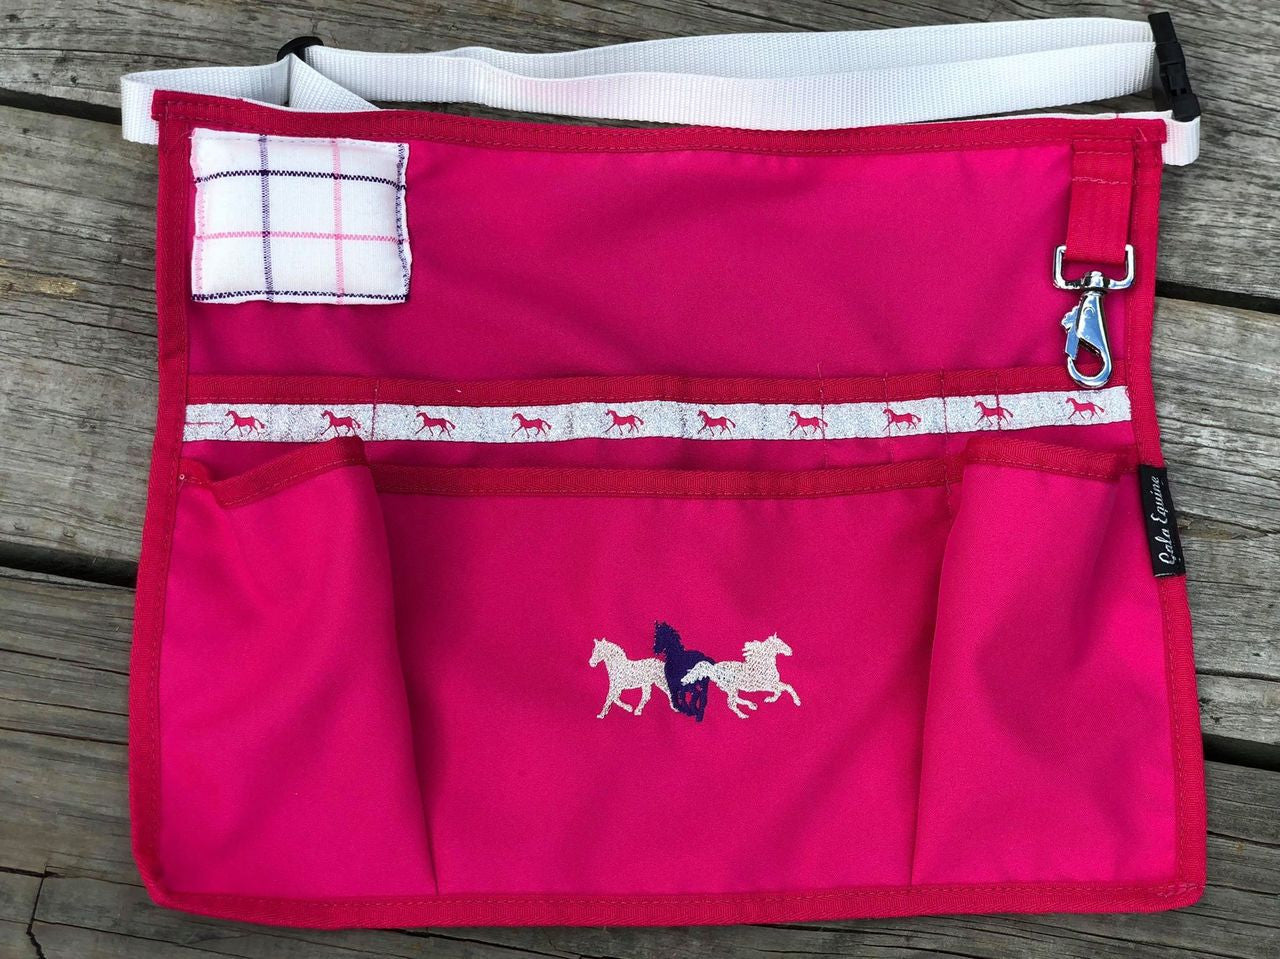 Hot Pink Apron with Silver horses trims